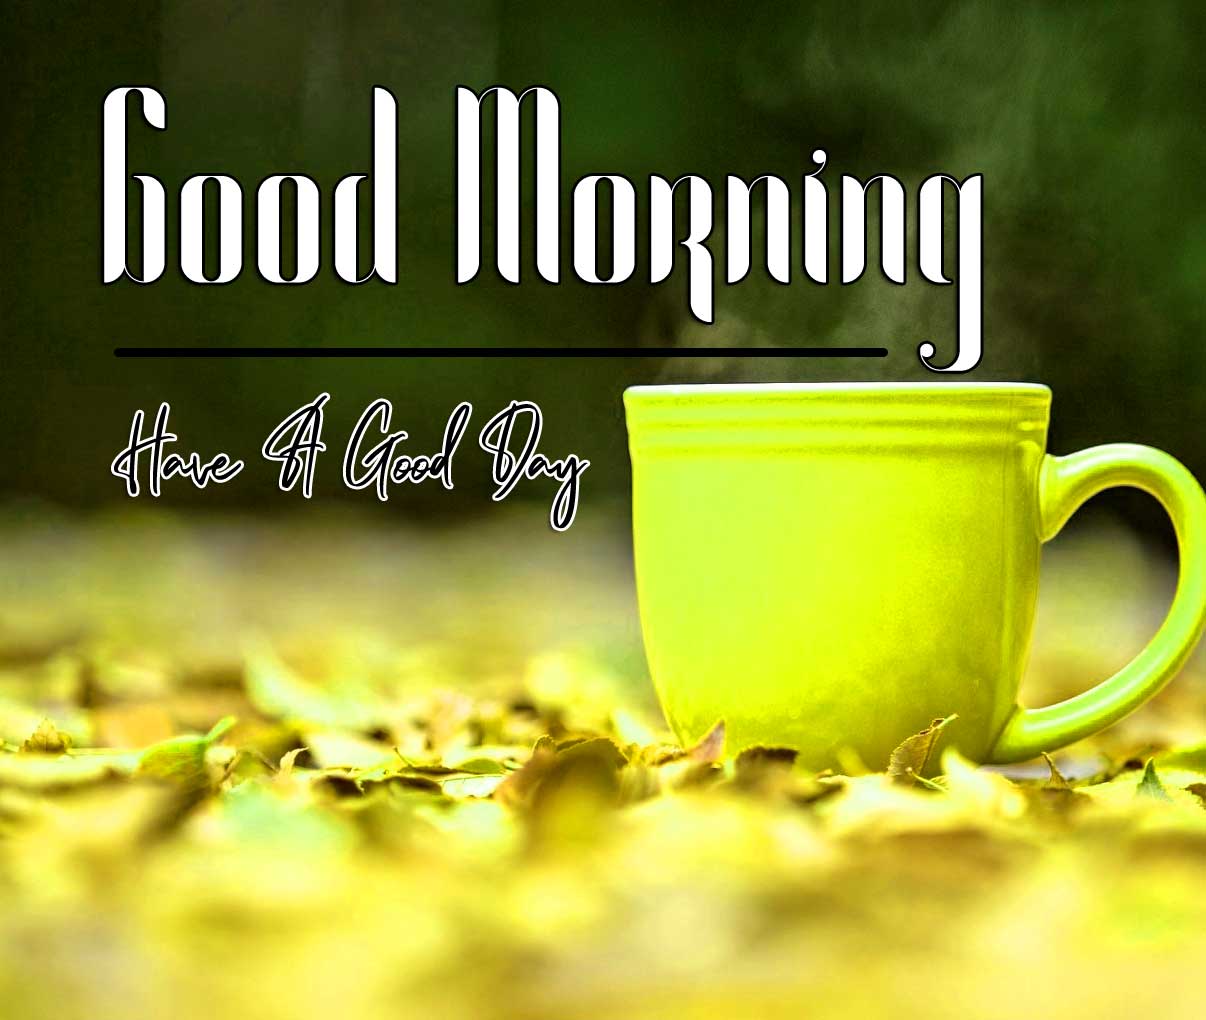 good morning wishes to wife Wallpaper Free Download 